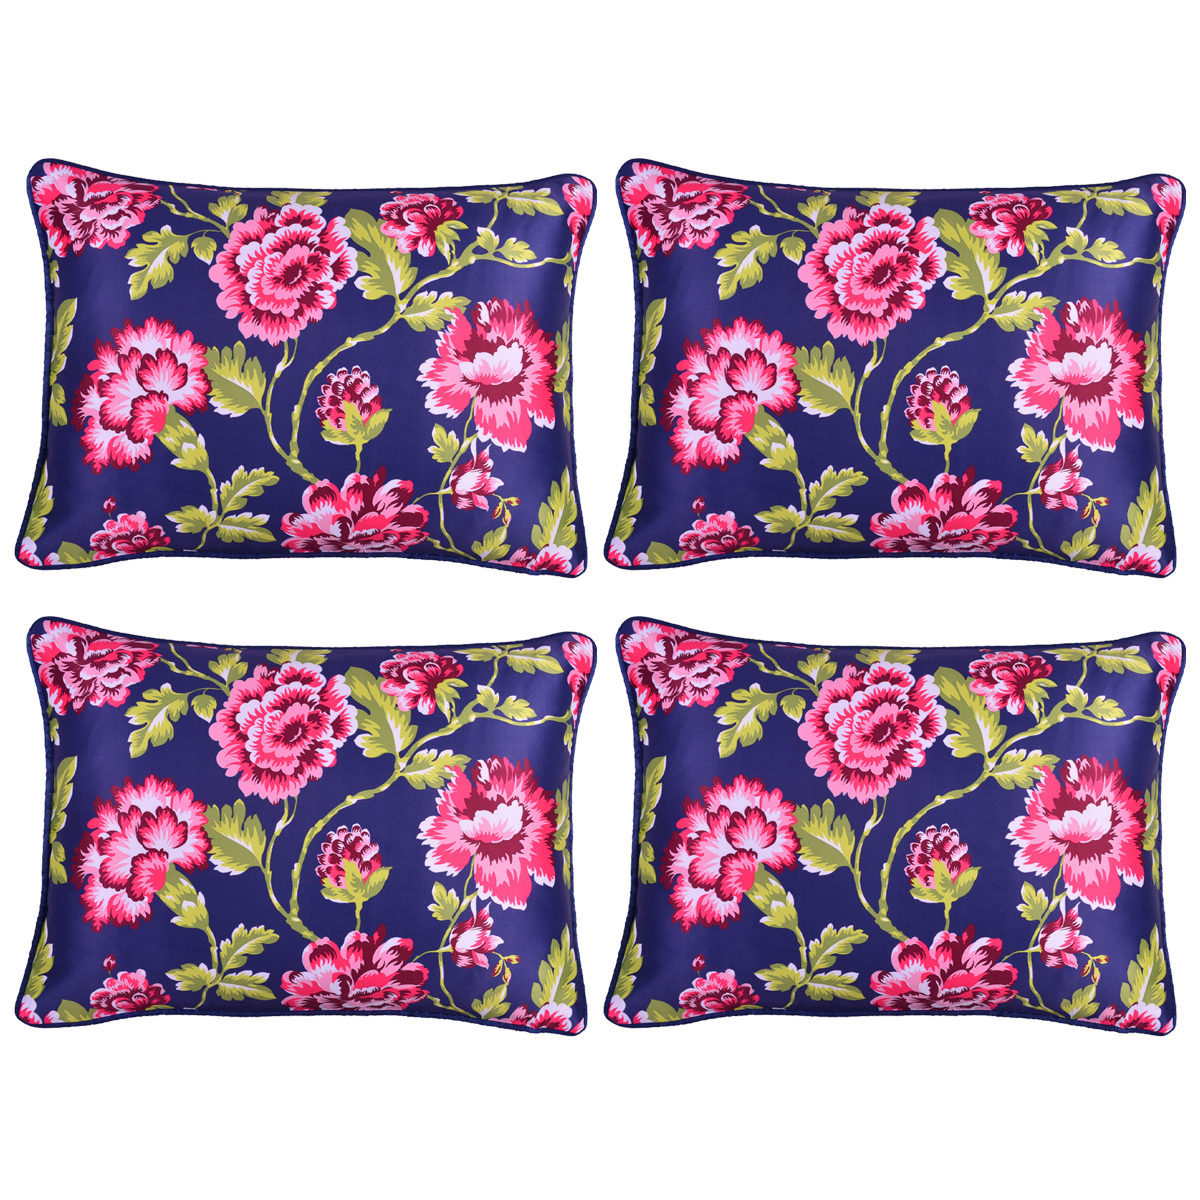 Throw Pillow Covers Set of 4 for Living Room Table, Floral Printed Cushion Case, 14x20 inches - Dark Blue - Home Decor - image 4 of 13